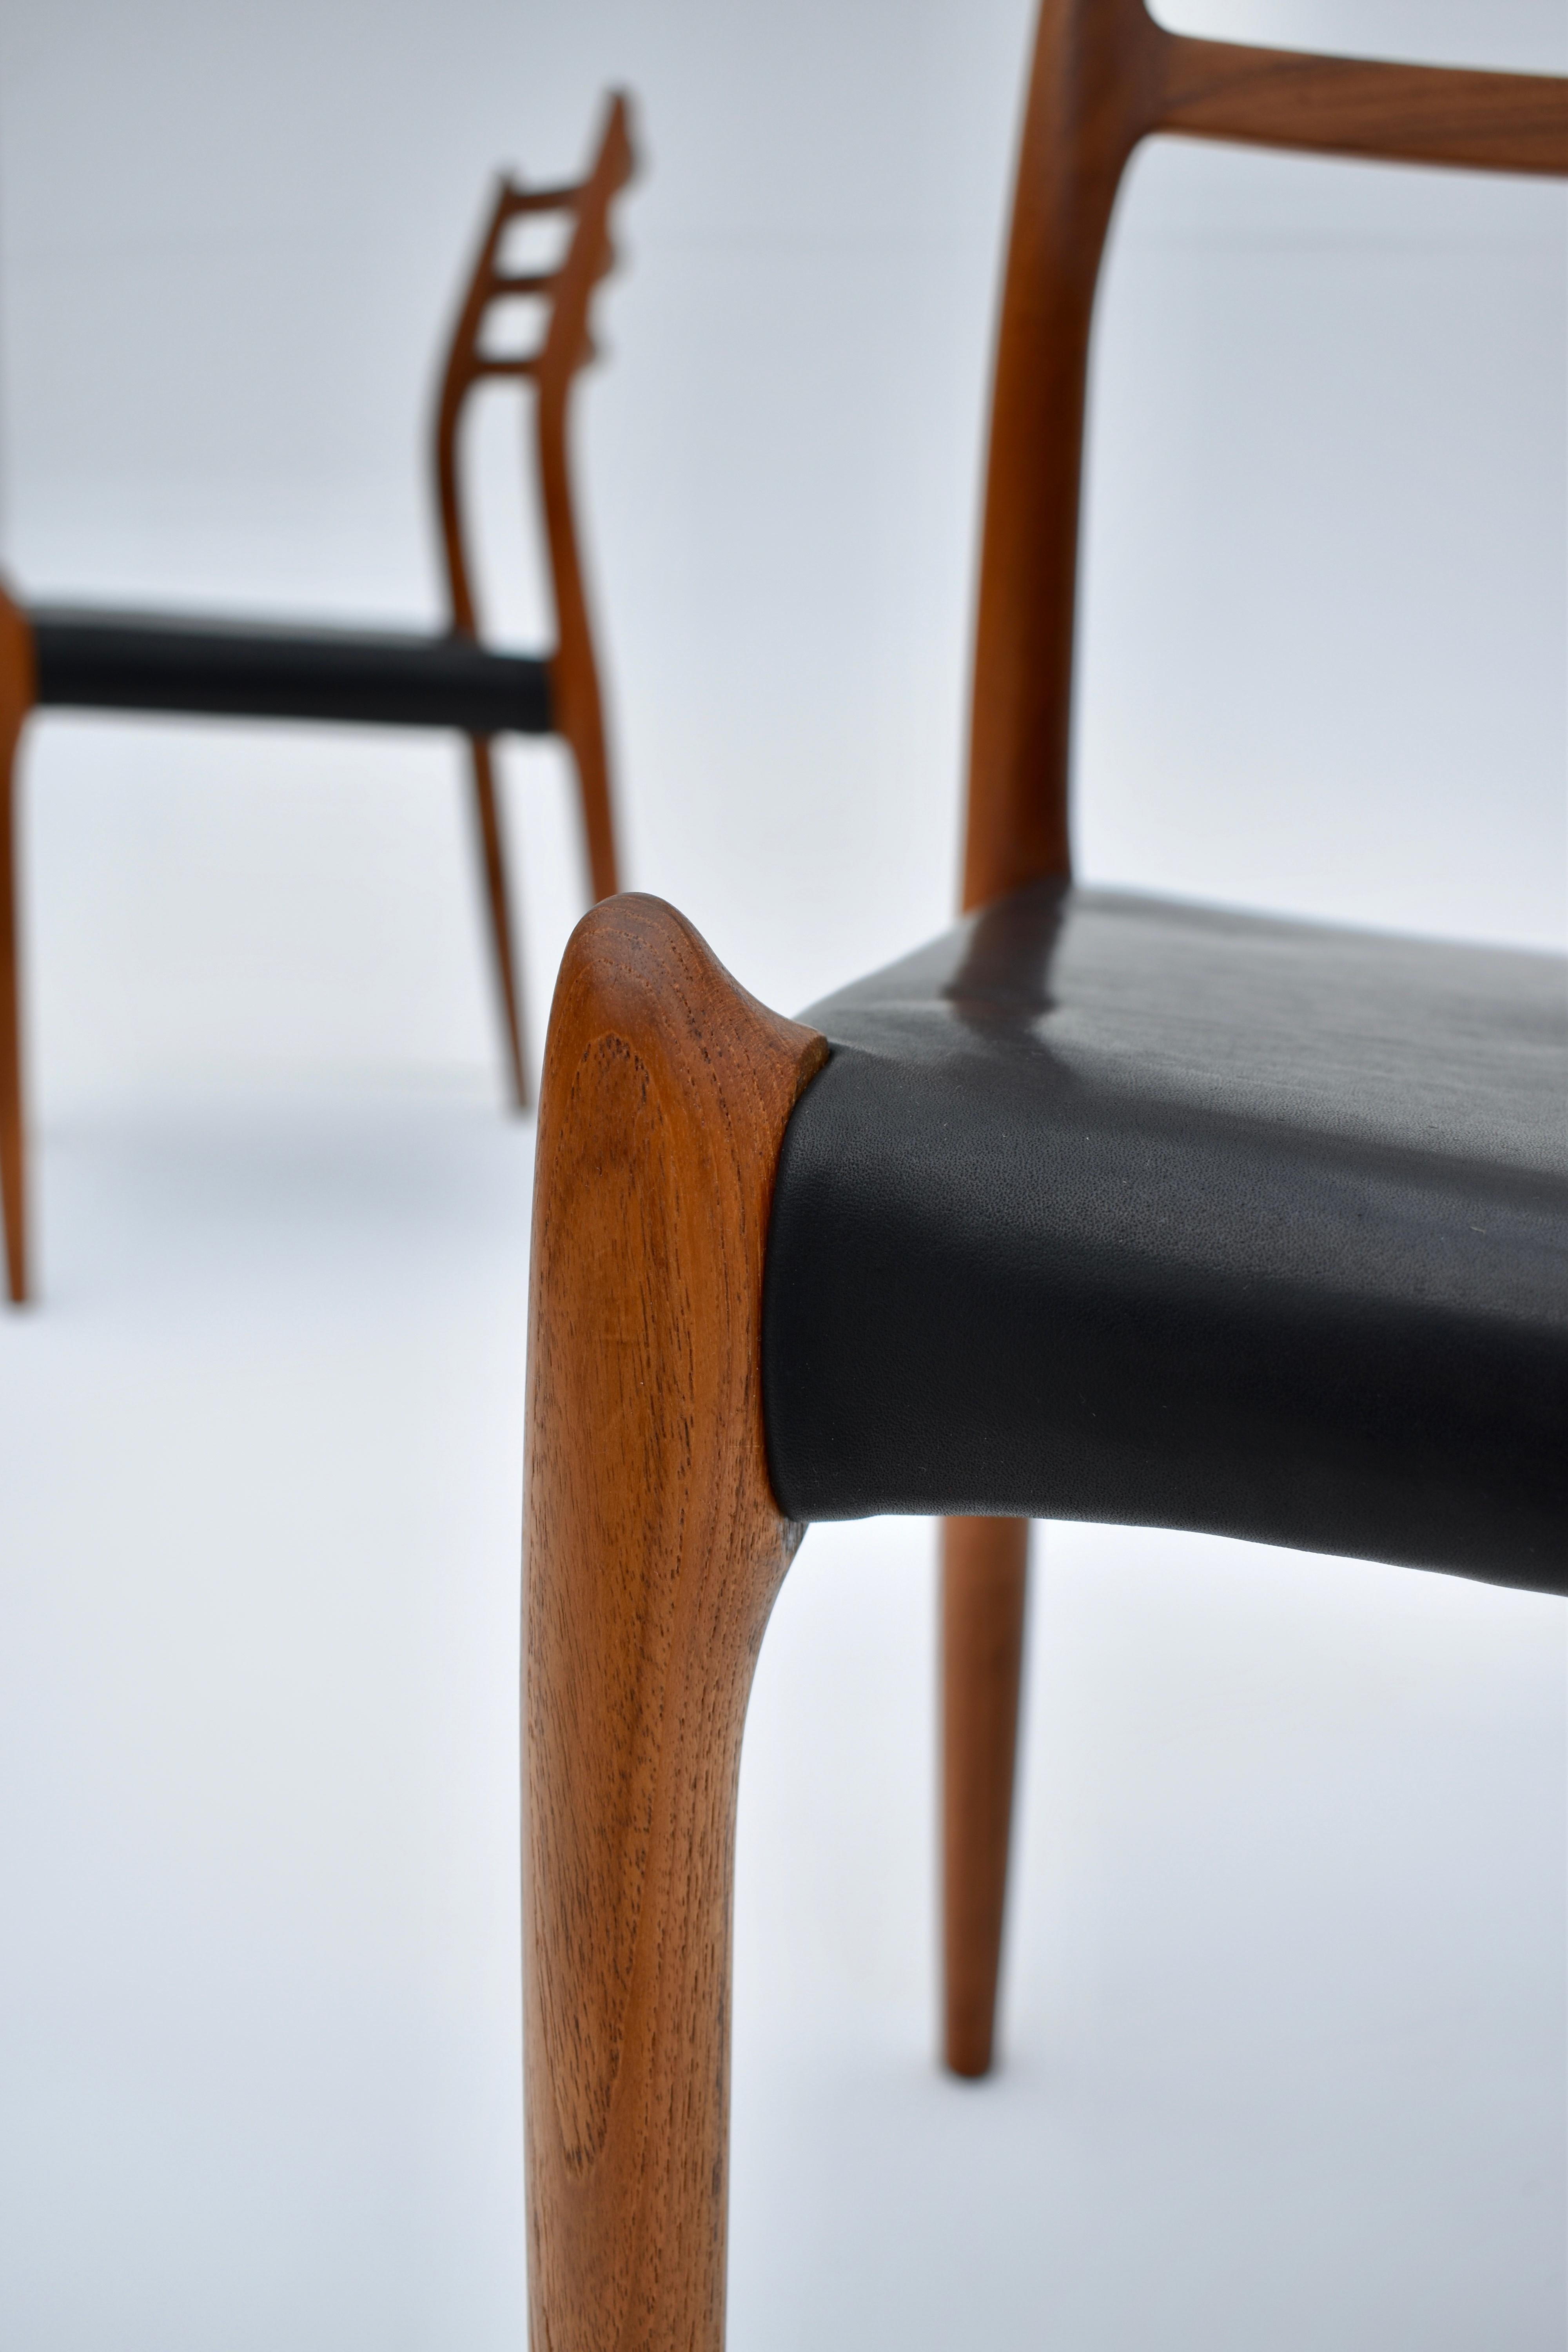 A particularly nice set of four solid teak chairs designed in 1962 by Niels Moller for J.L Mollers Mobelfabrik.

These chairs have just been upholstered with brand new vegetable tanned leather seats of the highest quality. This leather is very